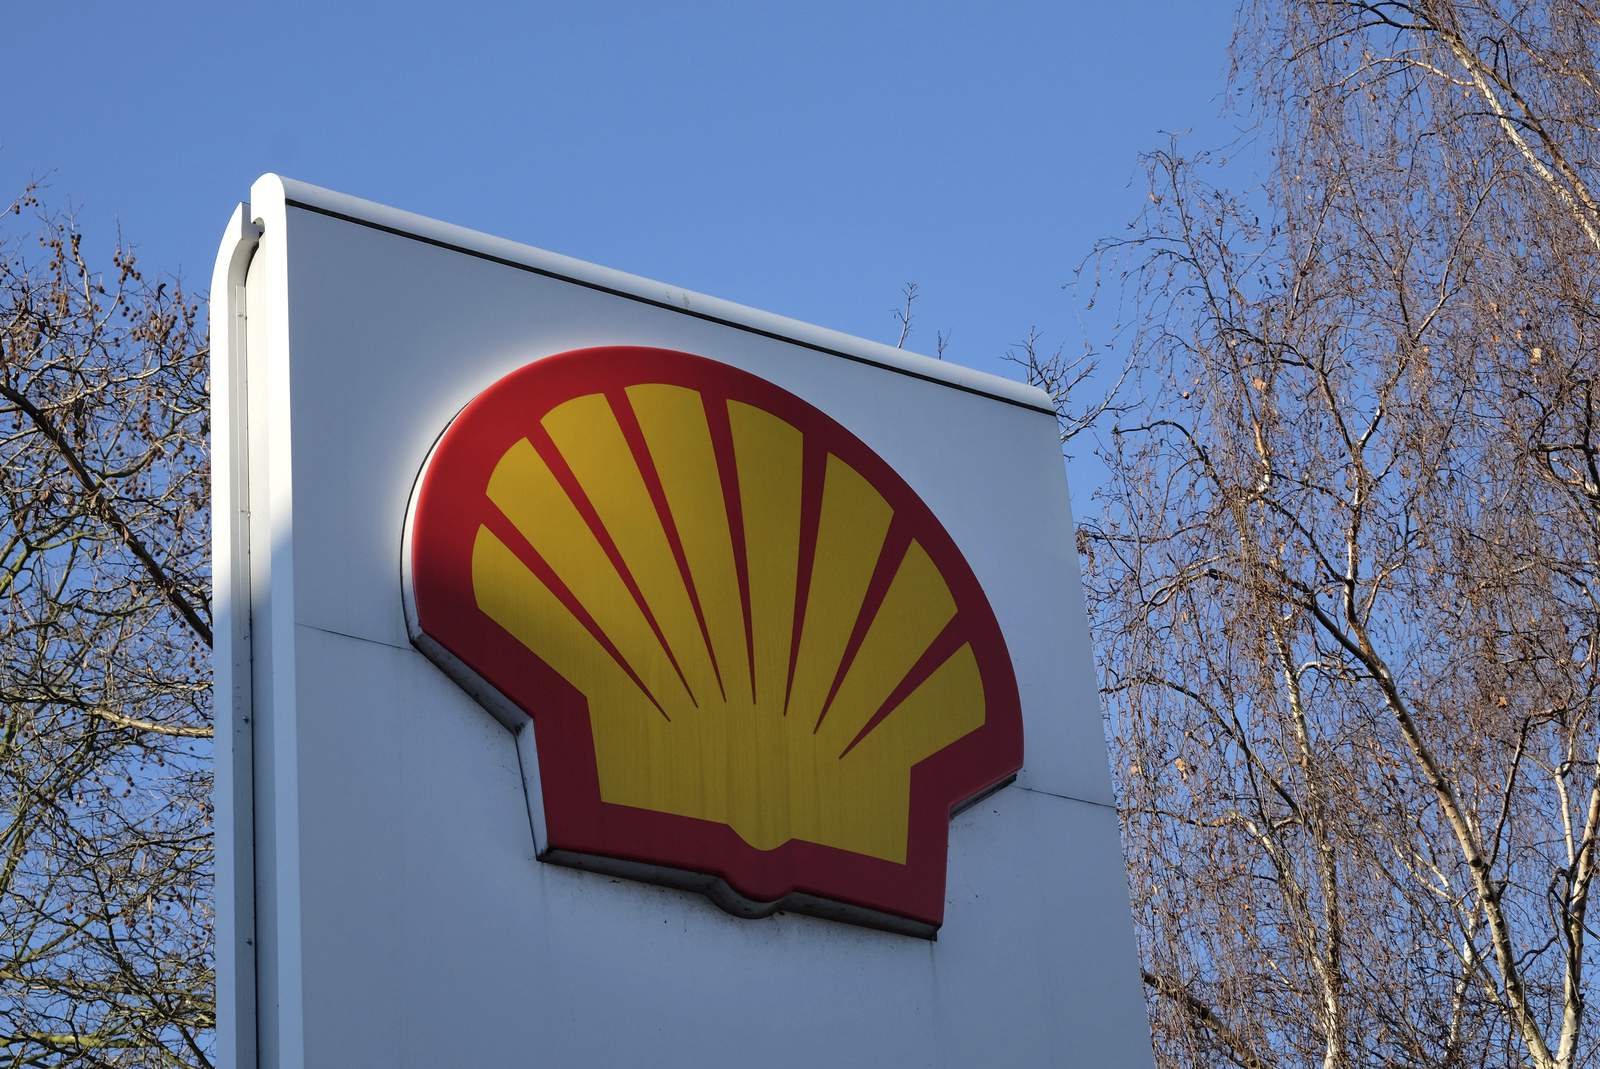 Shell plans to cut up to 9,000 jobs as oil demand slumps